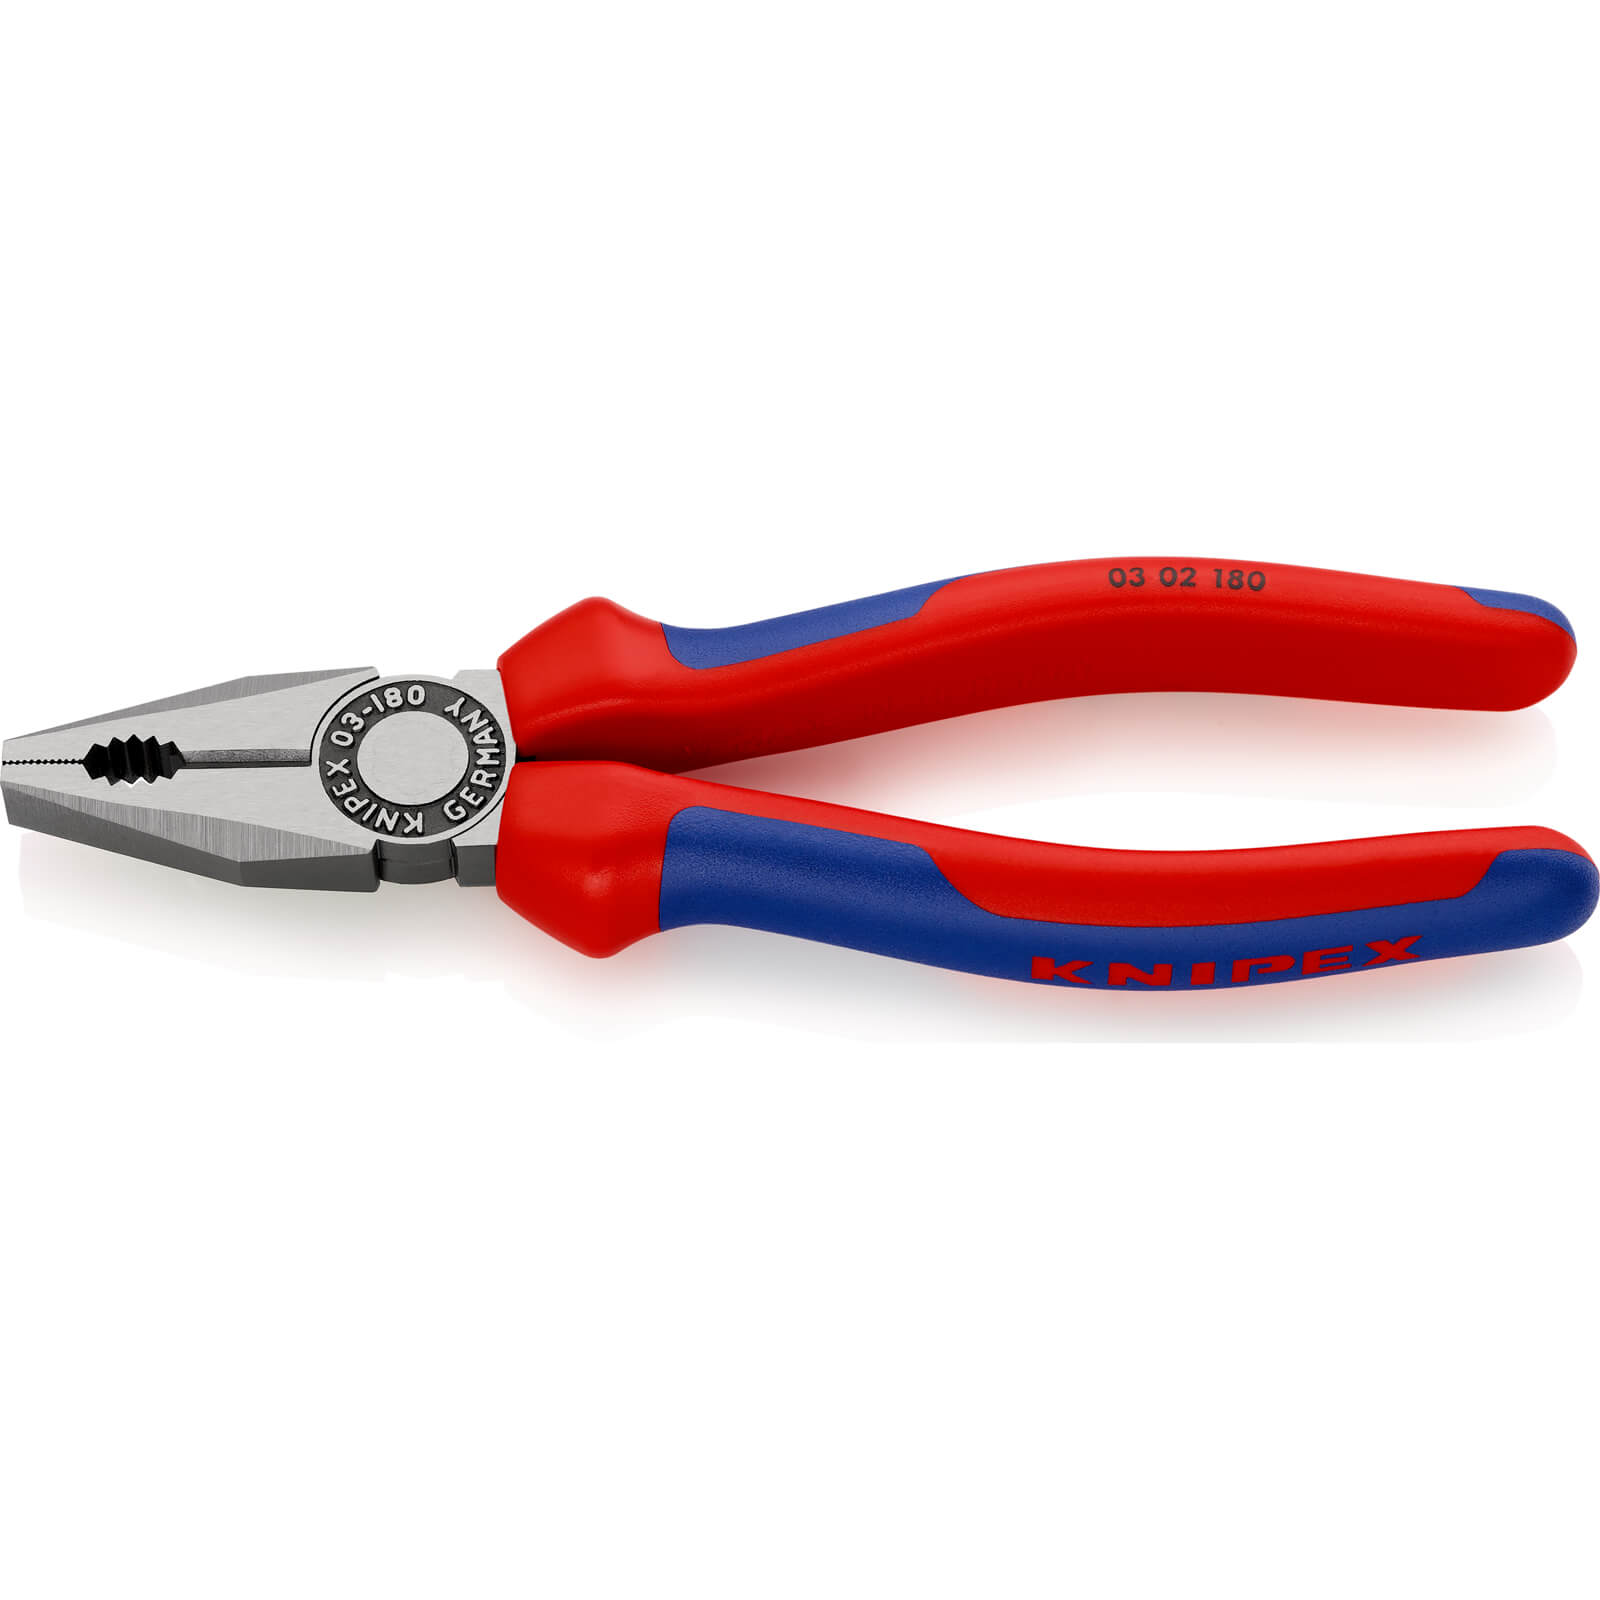 Image of Knipex 03 02 Combination Pliers 180mm